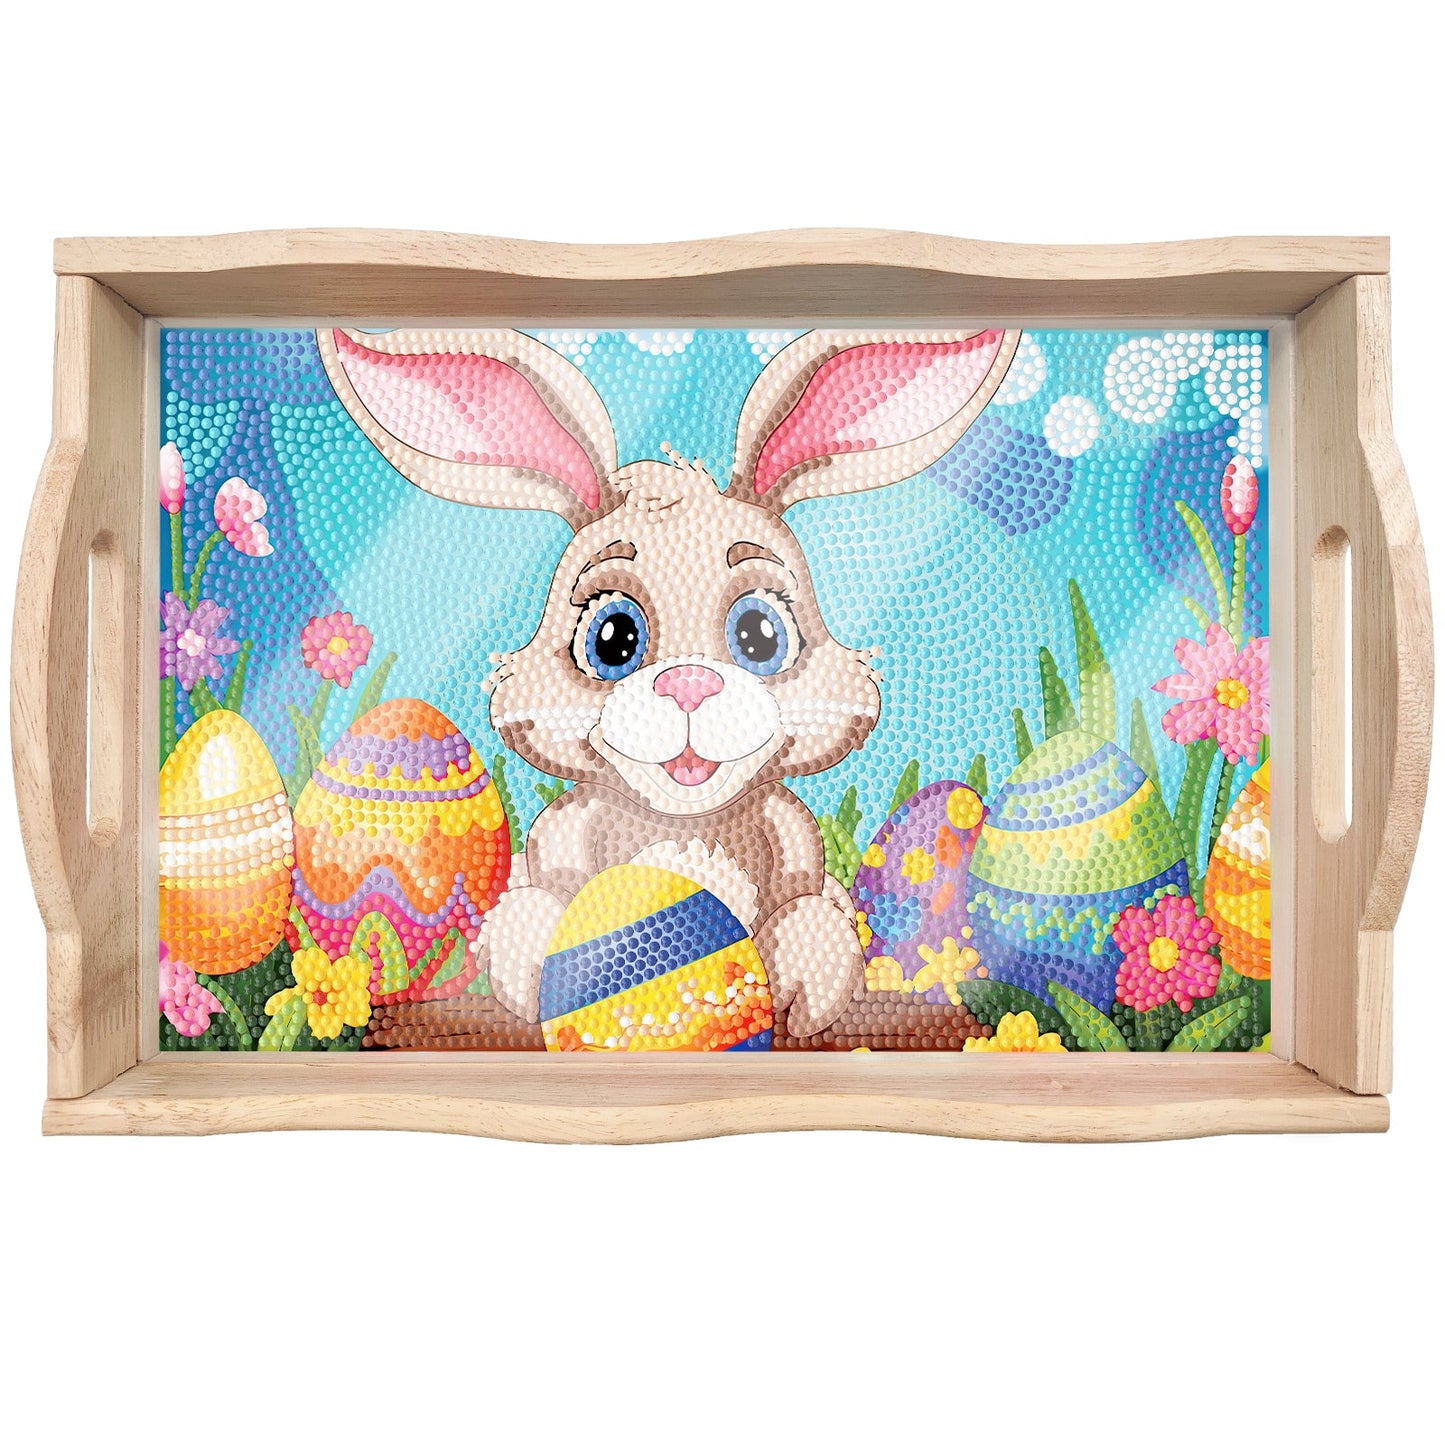 Diamond Painting Wooden Trays With Handle - Easter